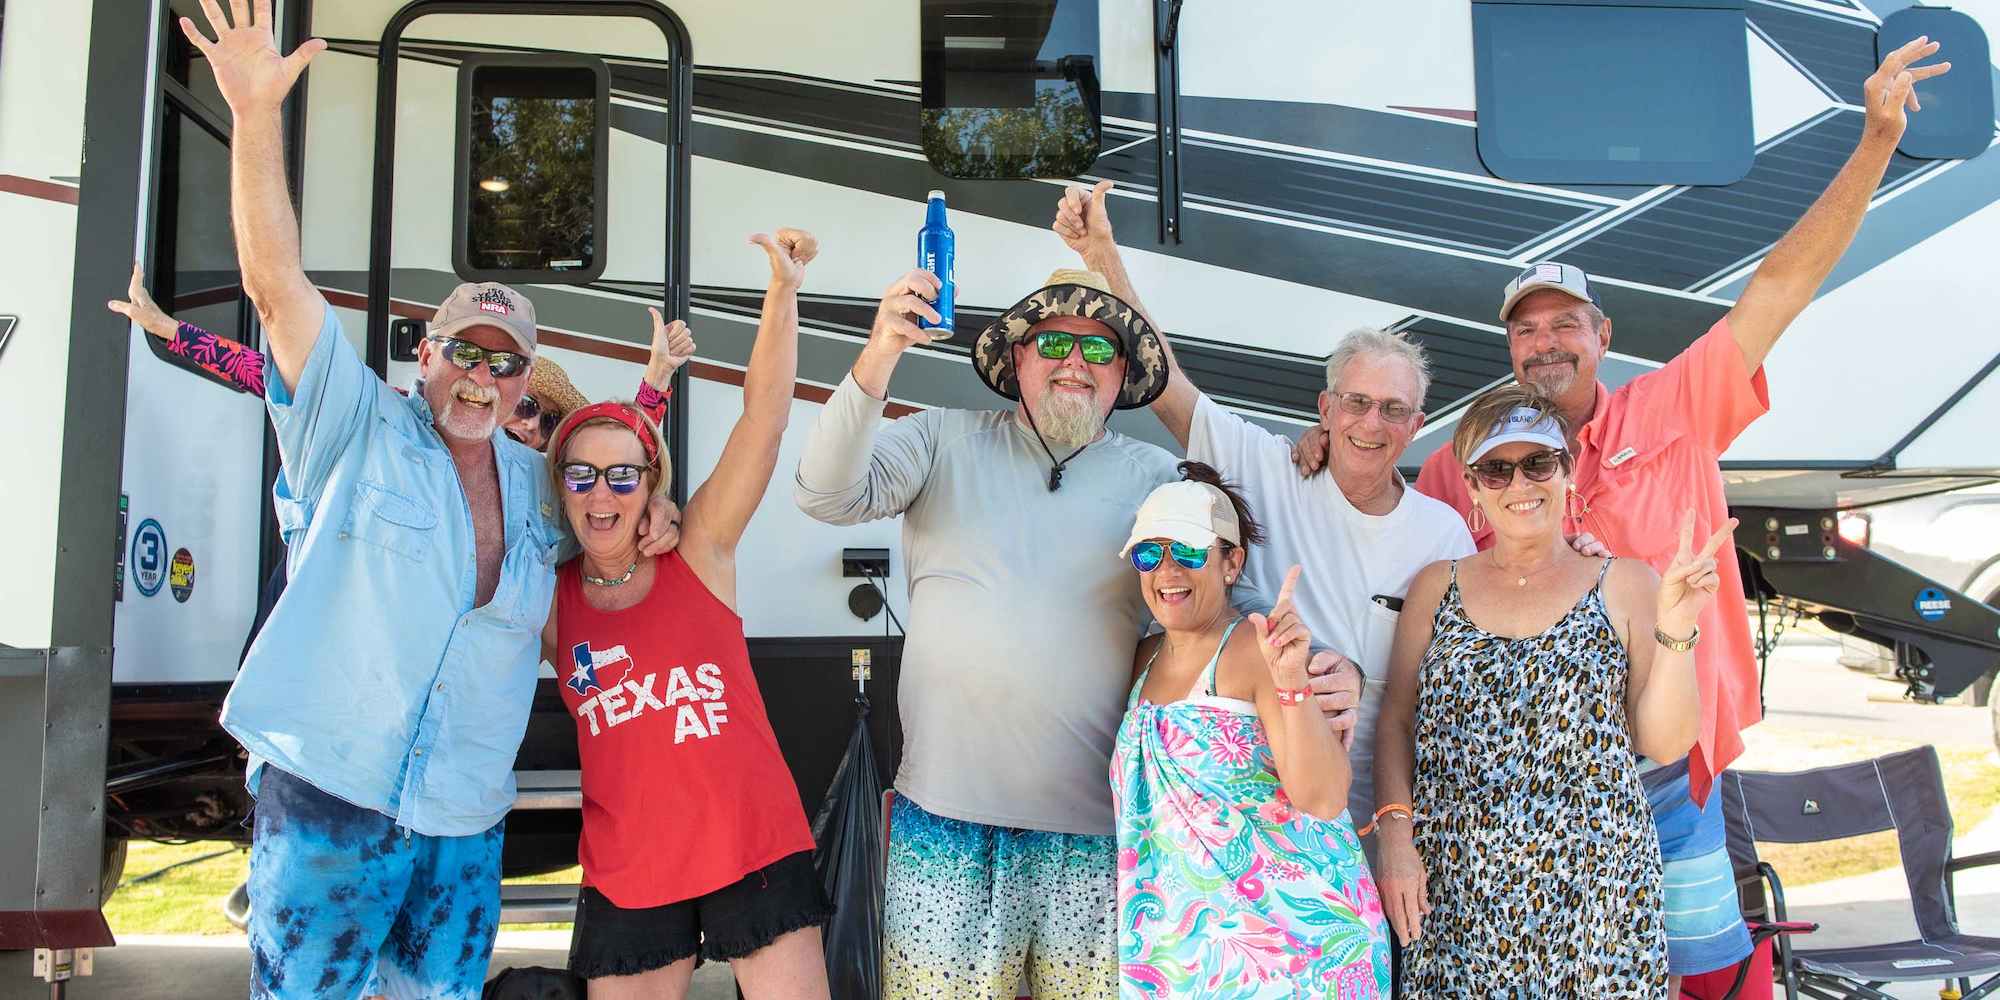 A group of guests having a blast at their RV site at Camp Fimfo